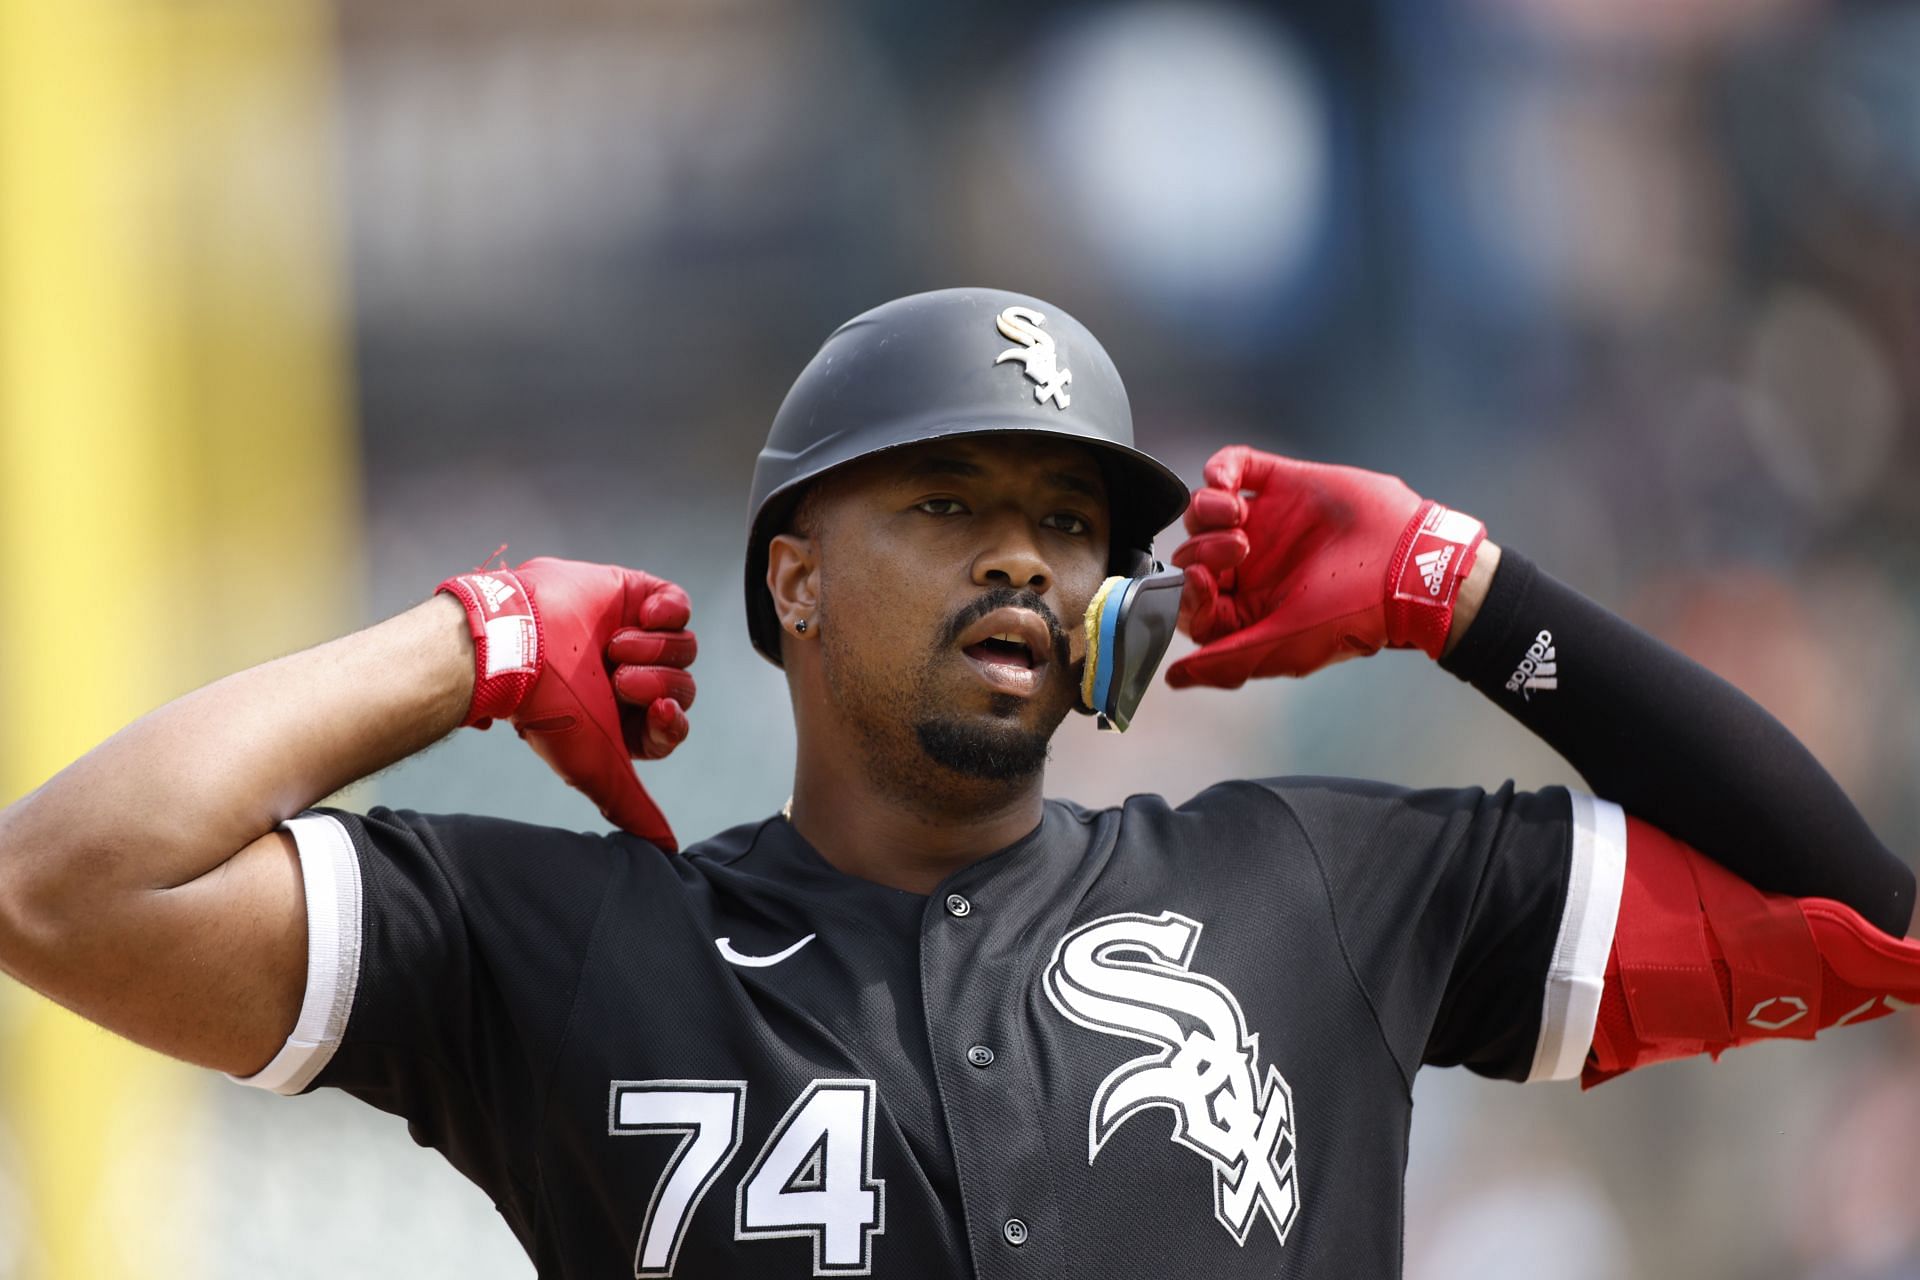 Chicago White Sox fans react to outfielder Eloy Jimenez preparing to return  to the outfield: Bro you are a DH Just, no